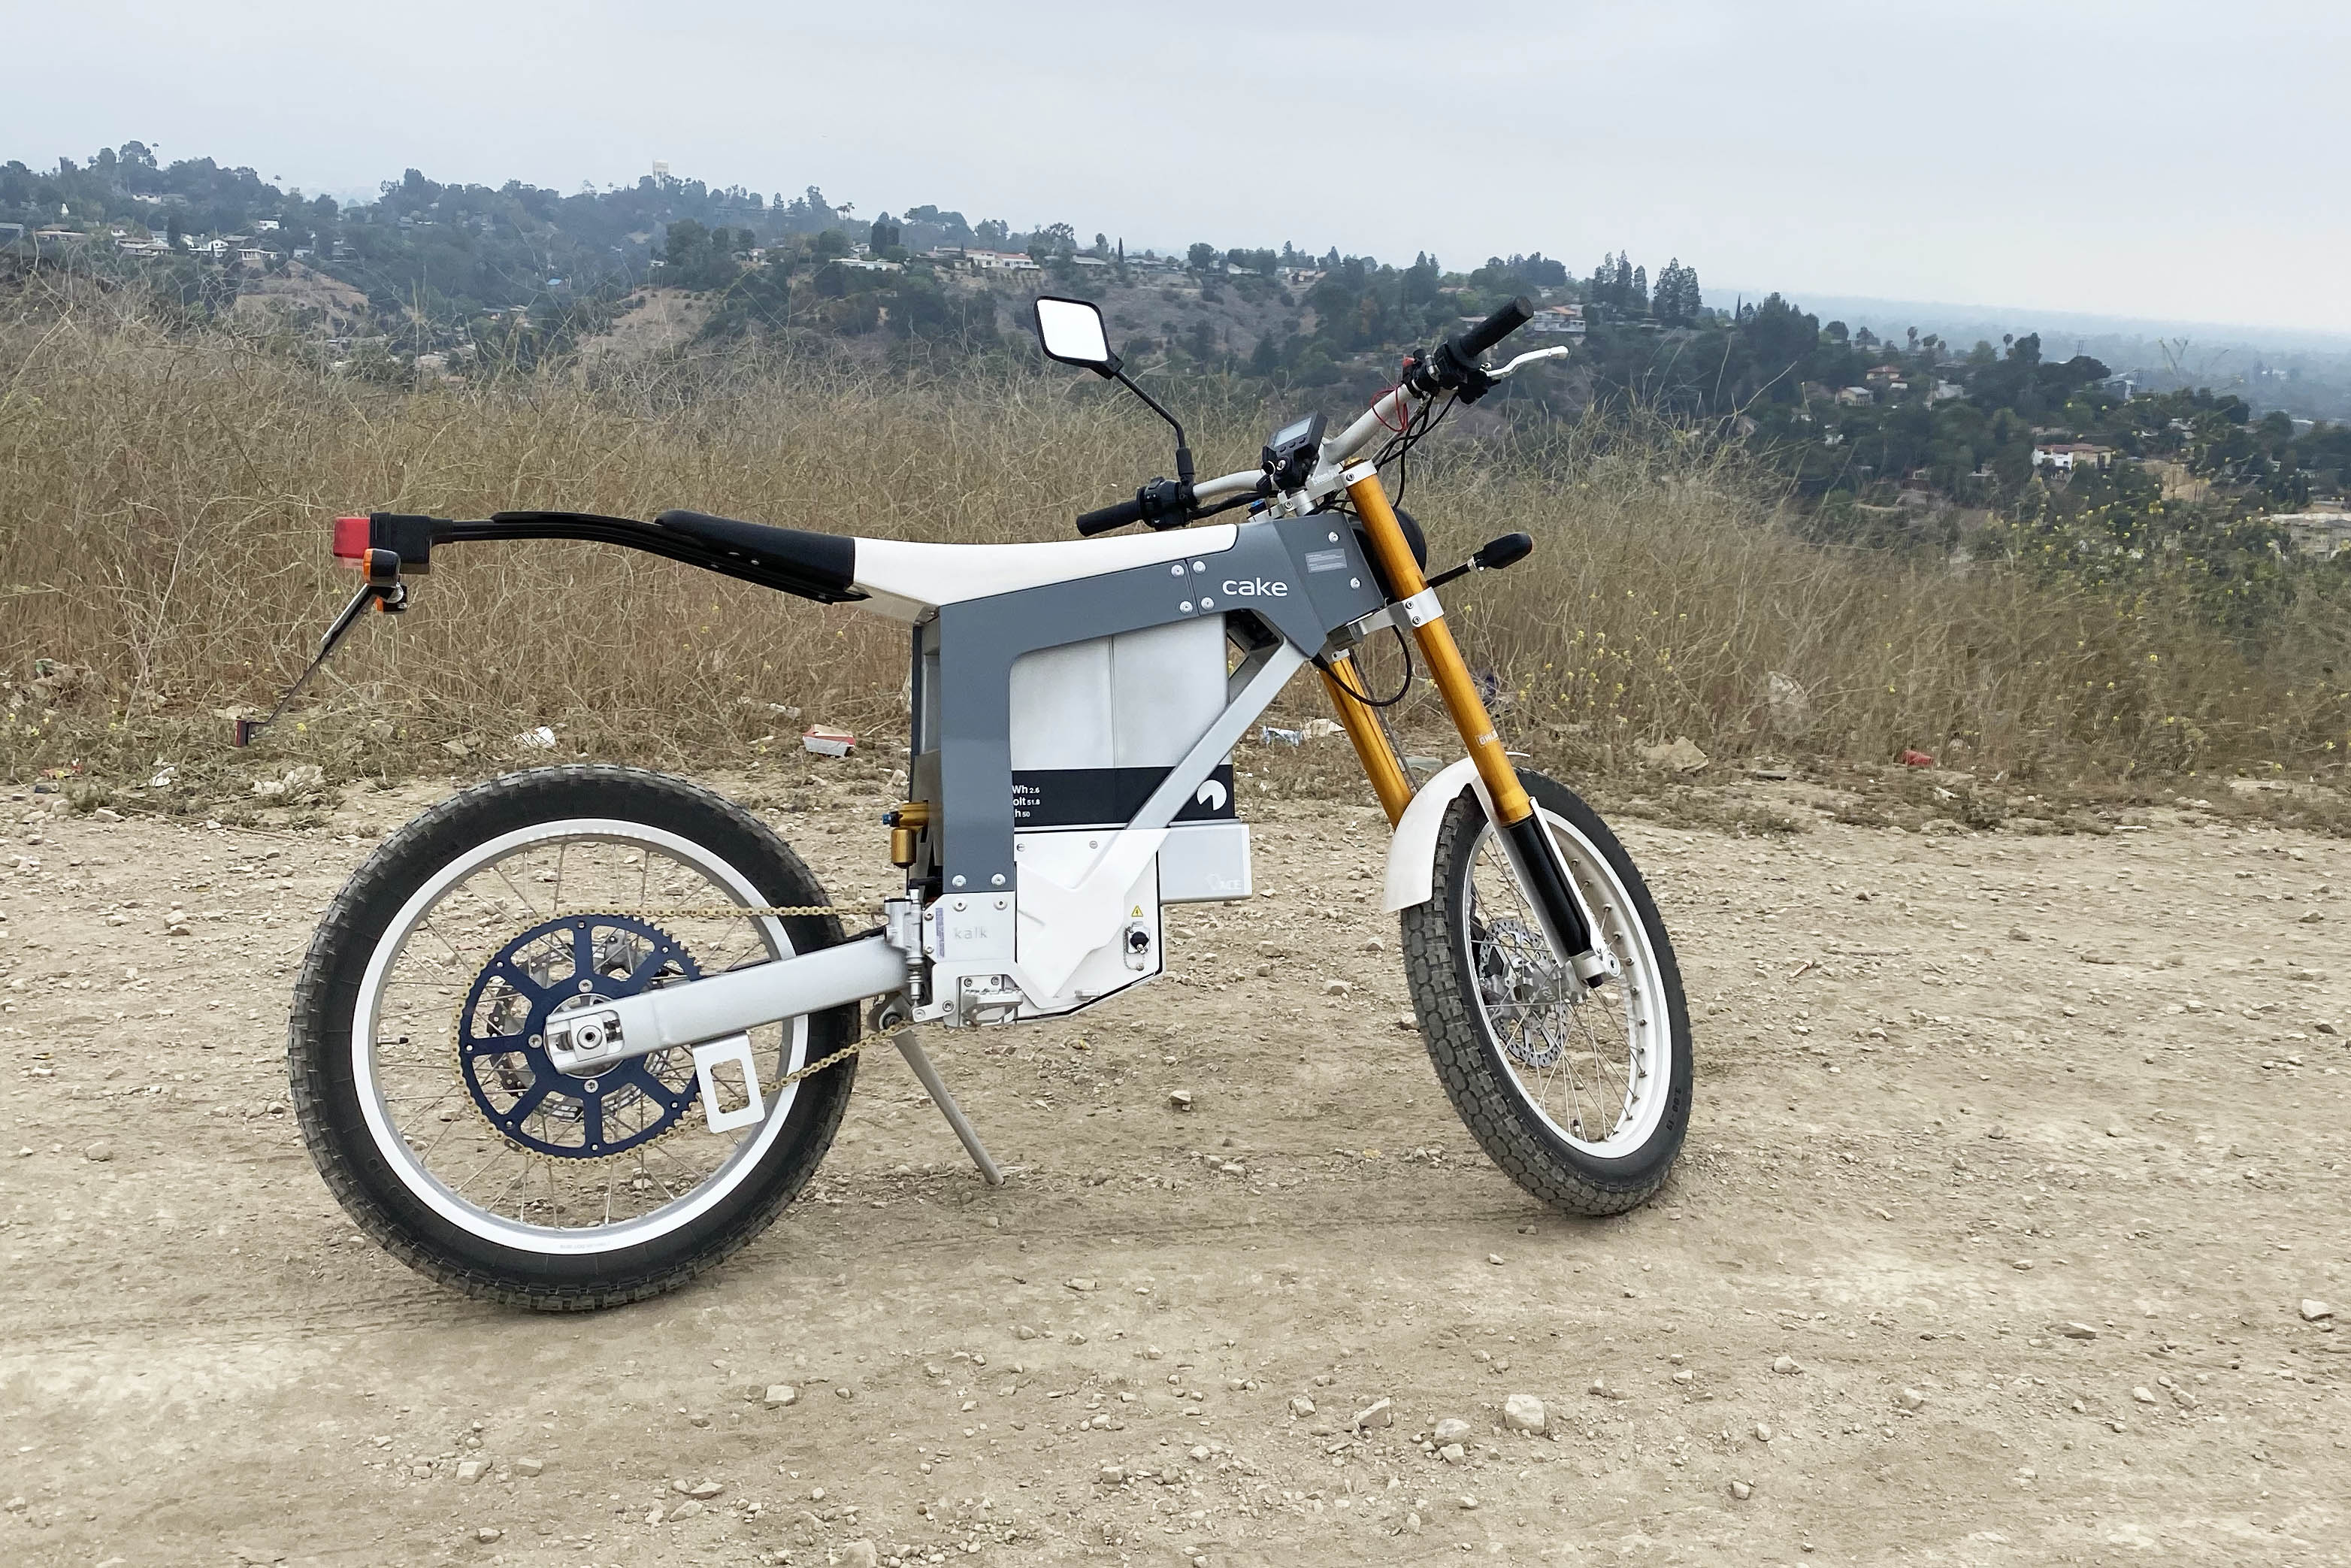 relates to Back to the Bike Lane: The Cake Electric Motorcycle Just Isn’t It